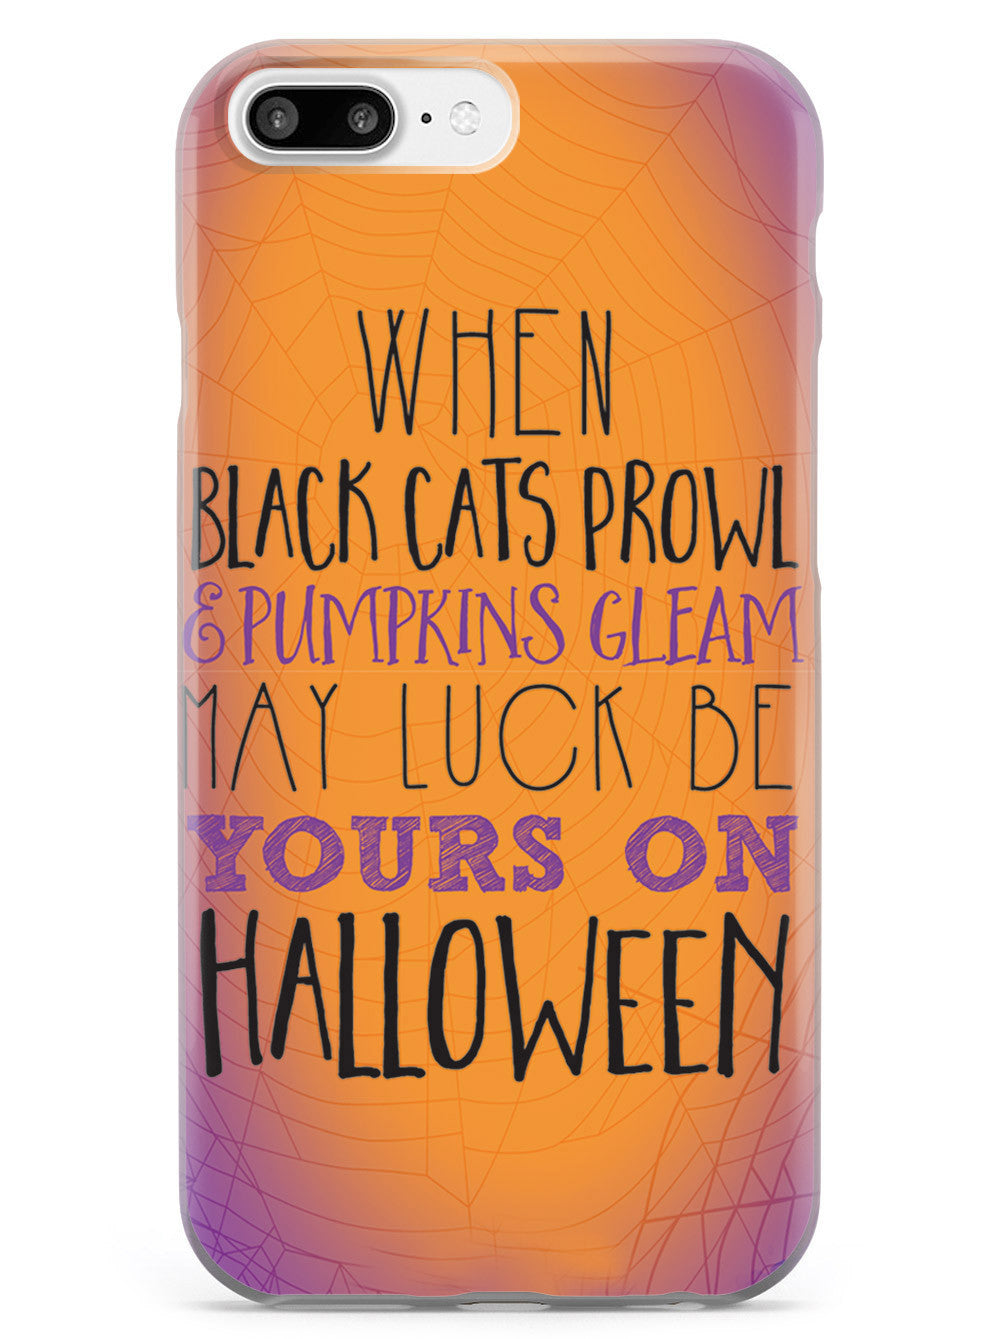 Black Cats Prowl and Pumpkins Gleam  Case